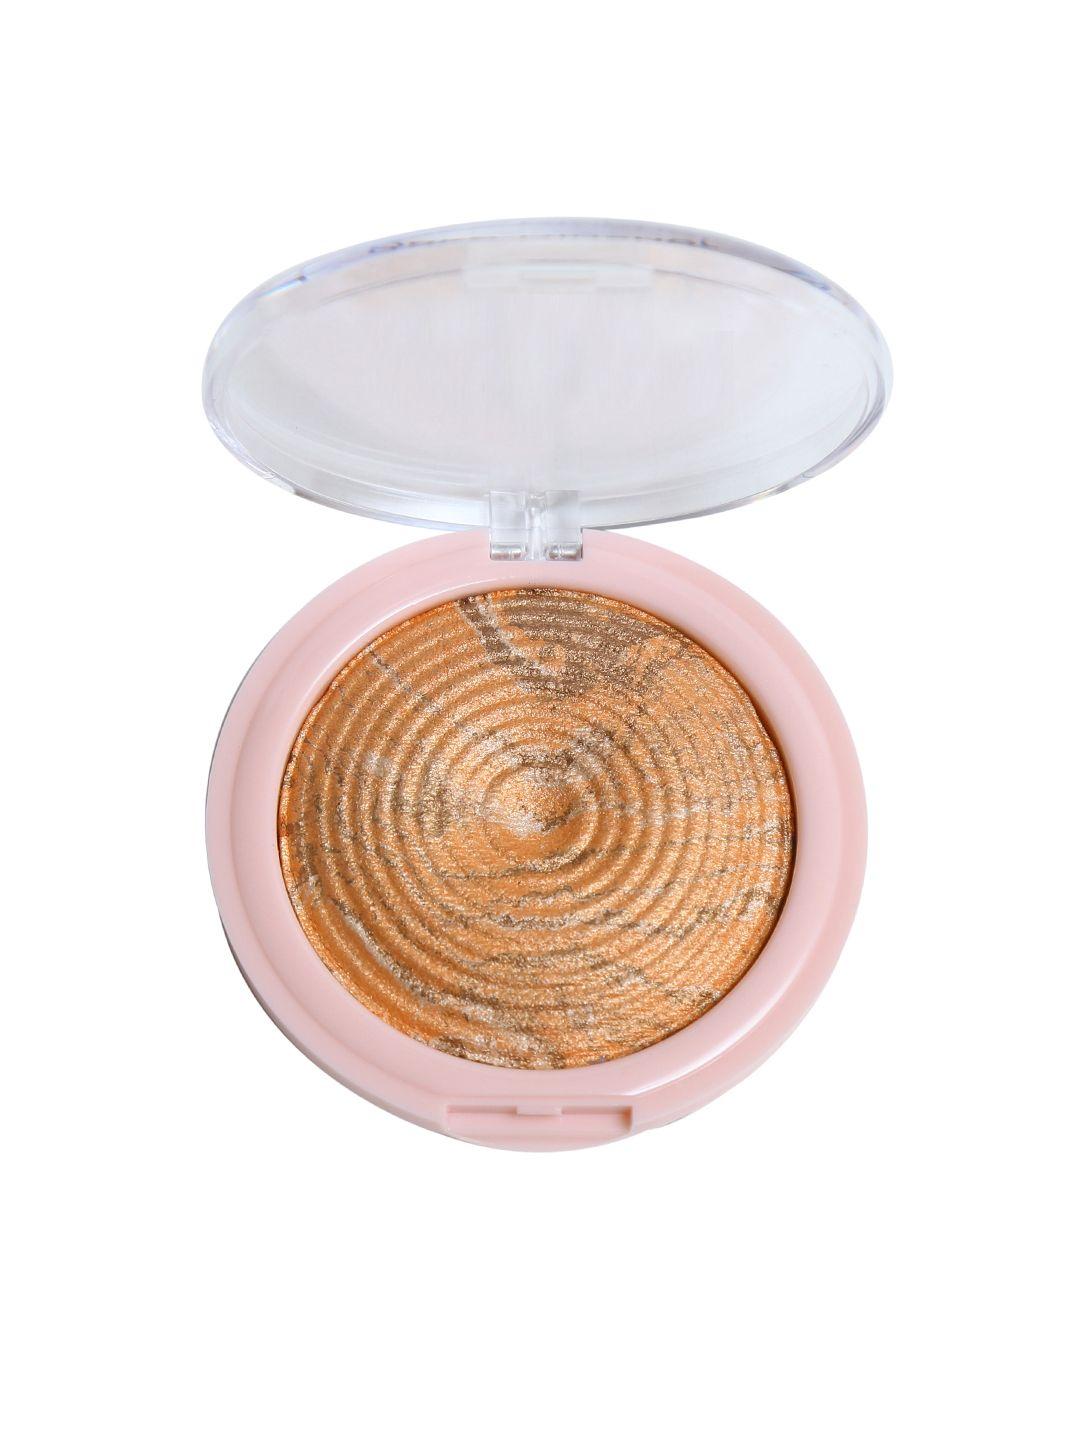 miss-claire-08-baked-blusher-8g